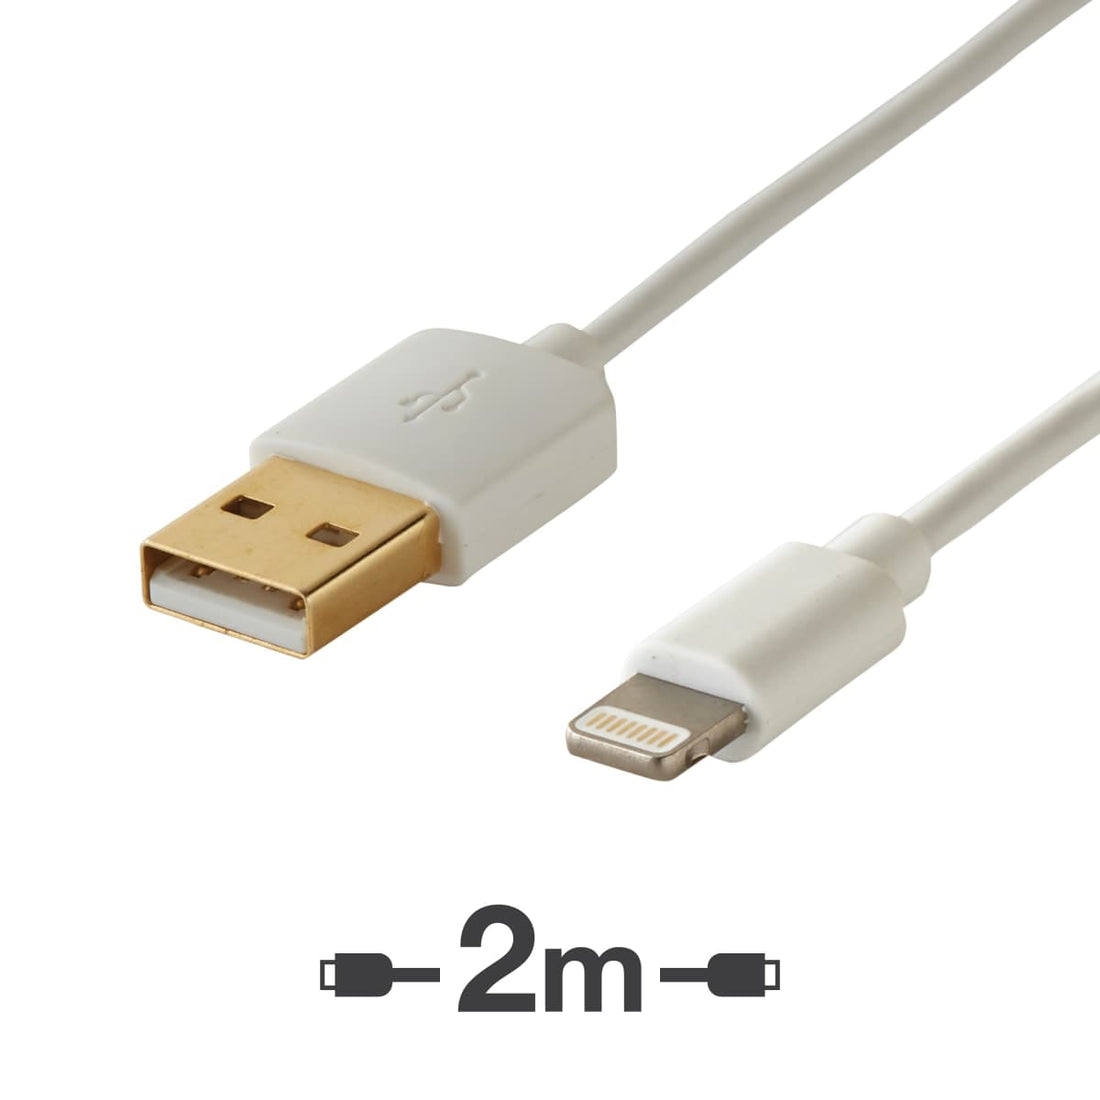 APPLE 2MT LIGHTNING TYPE / A TYPE USB CABLE - best price from Maltashopper.com BR420005314